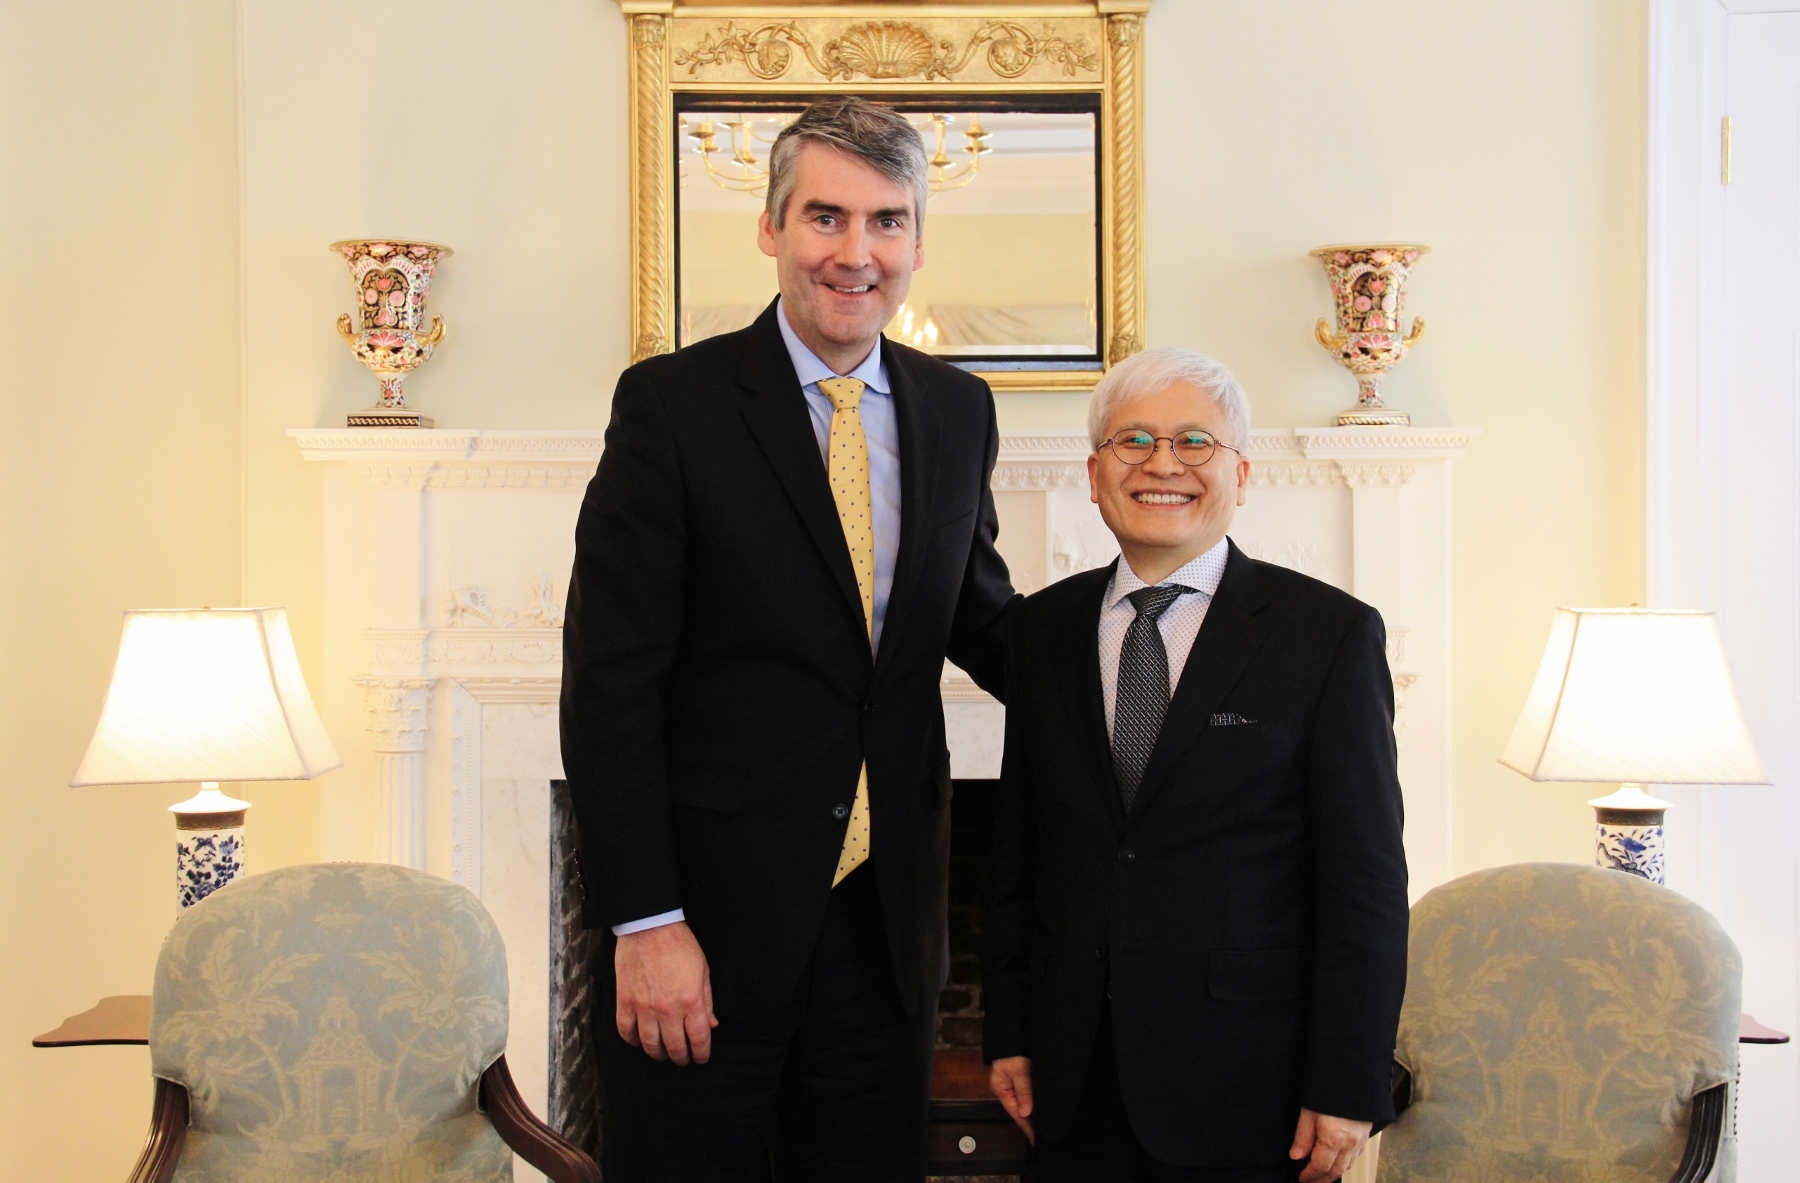 On April 5th, 2016 Premier Stephen McNeil met with His Excellency Daeshik Jo, Ambassador of the Republic of Korea to Canada during the Ambassador’s official visit to Nova Scotia.